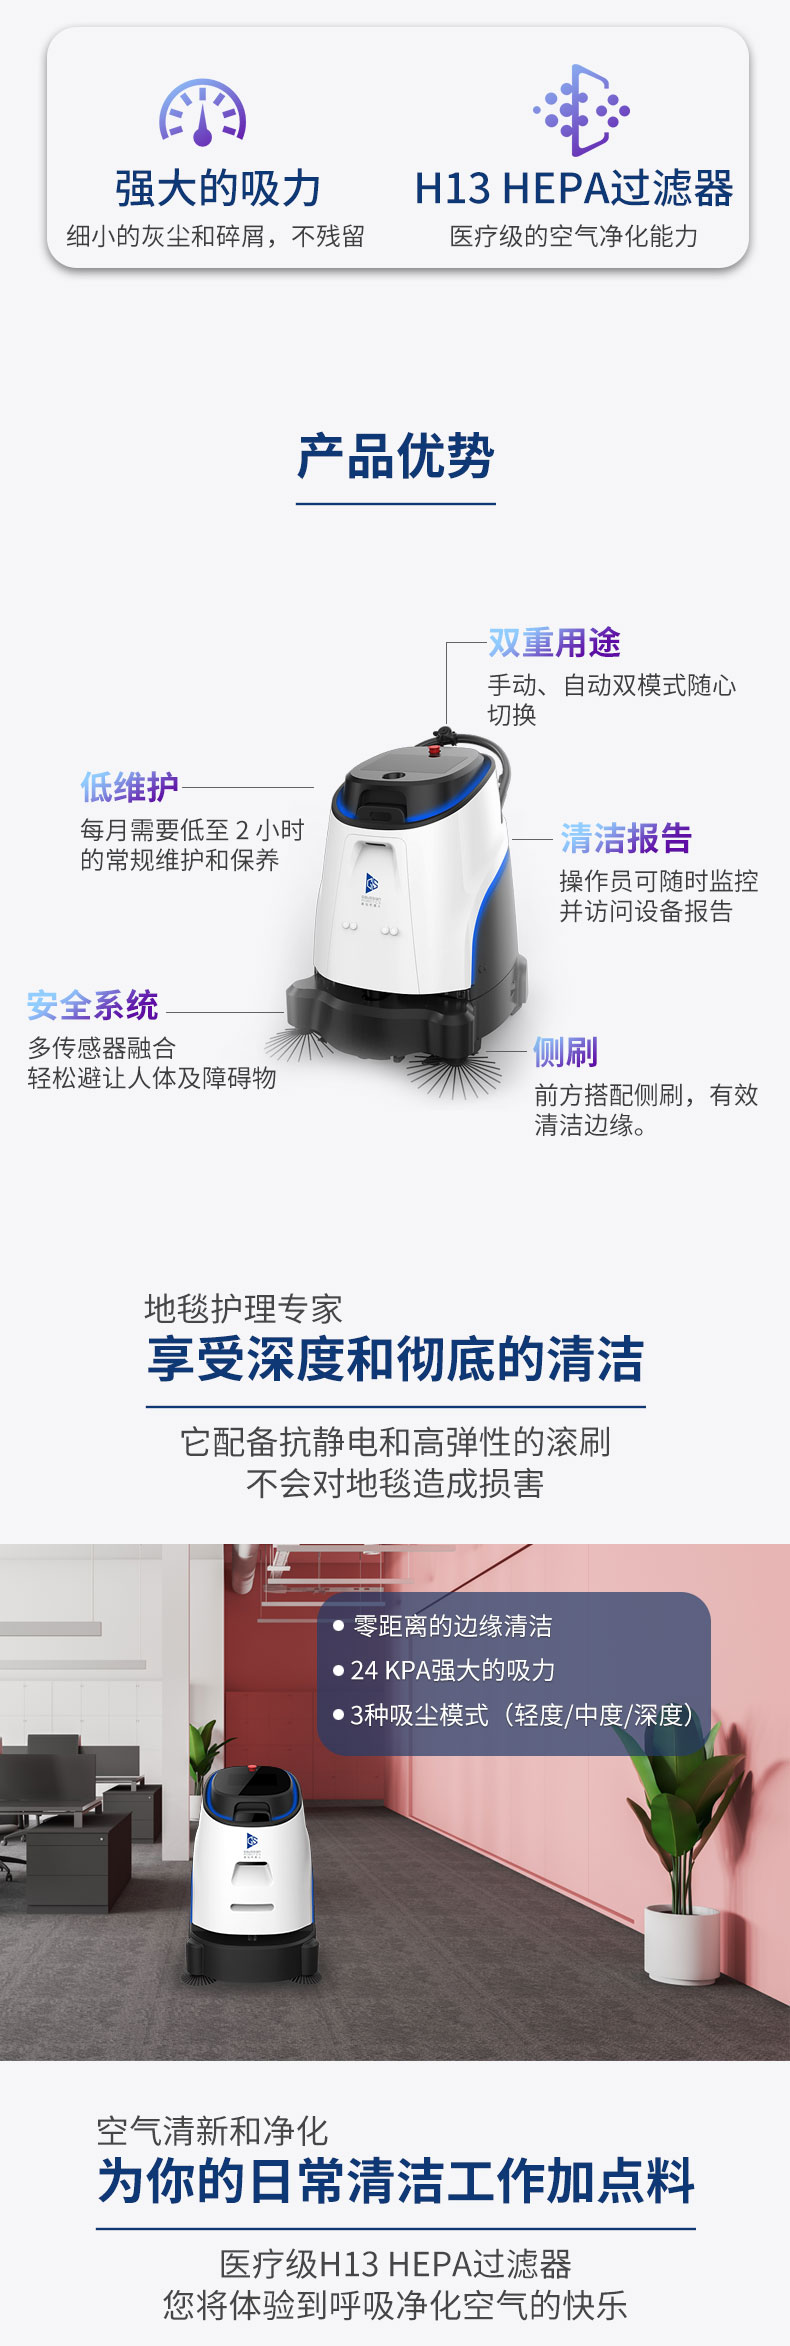 Gaoxian VACUUM 40 Intelligent Commercial Cleaning Robot Industrial Super Automatic Washing Machine Sweeper Scrubber